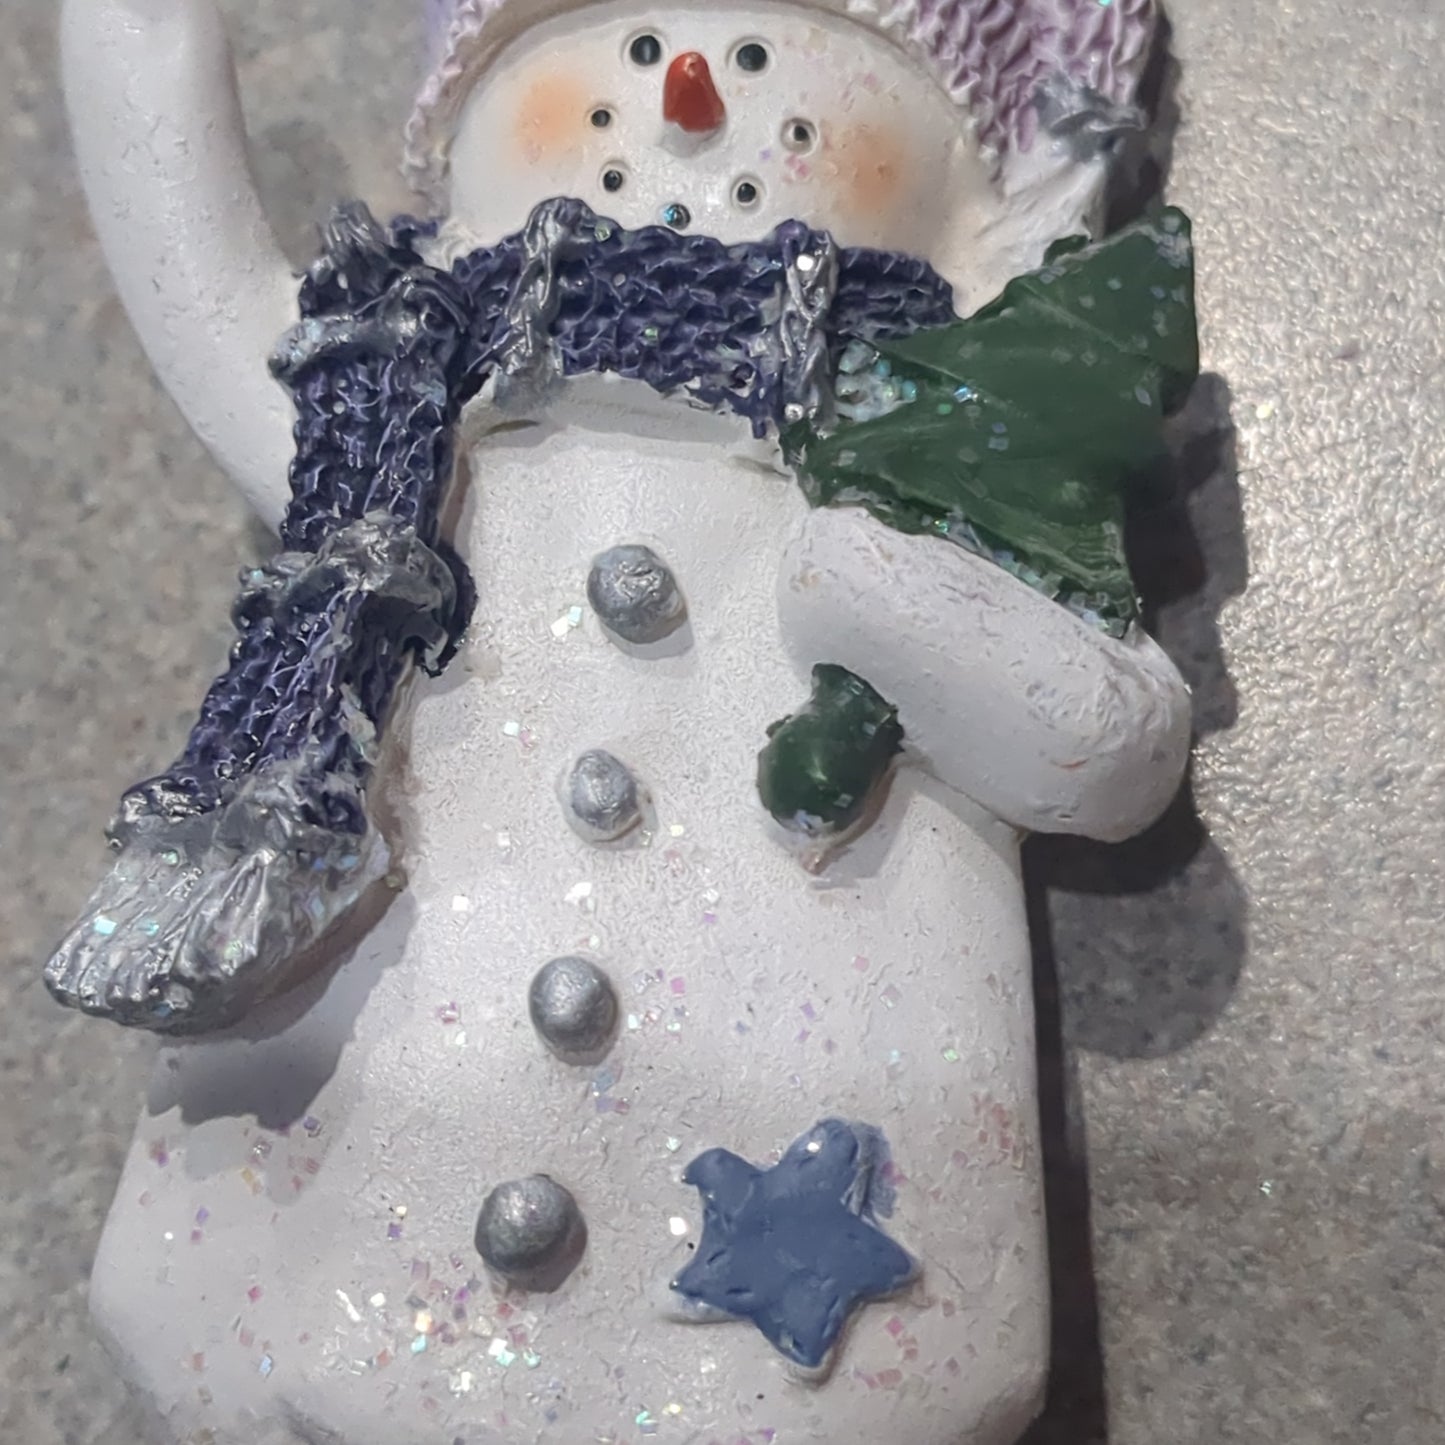 Polycrylic snowman ornament with a tree lilac and purple